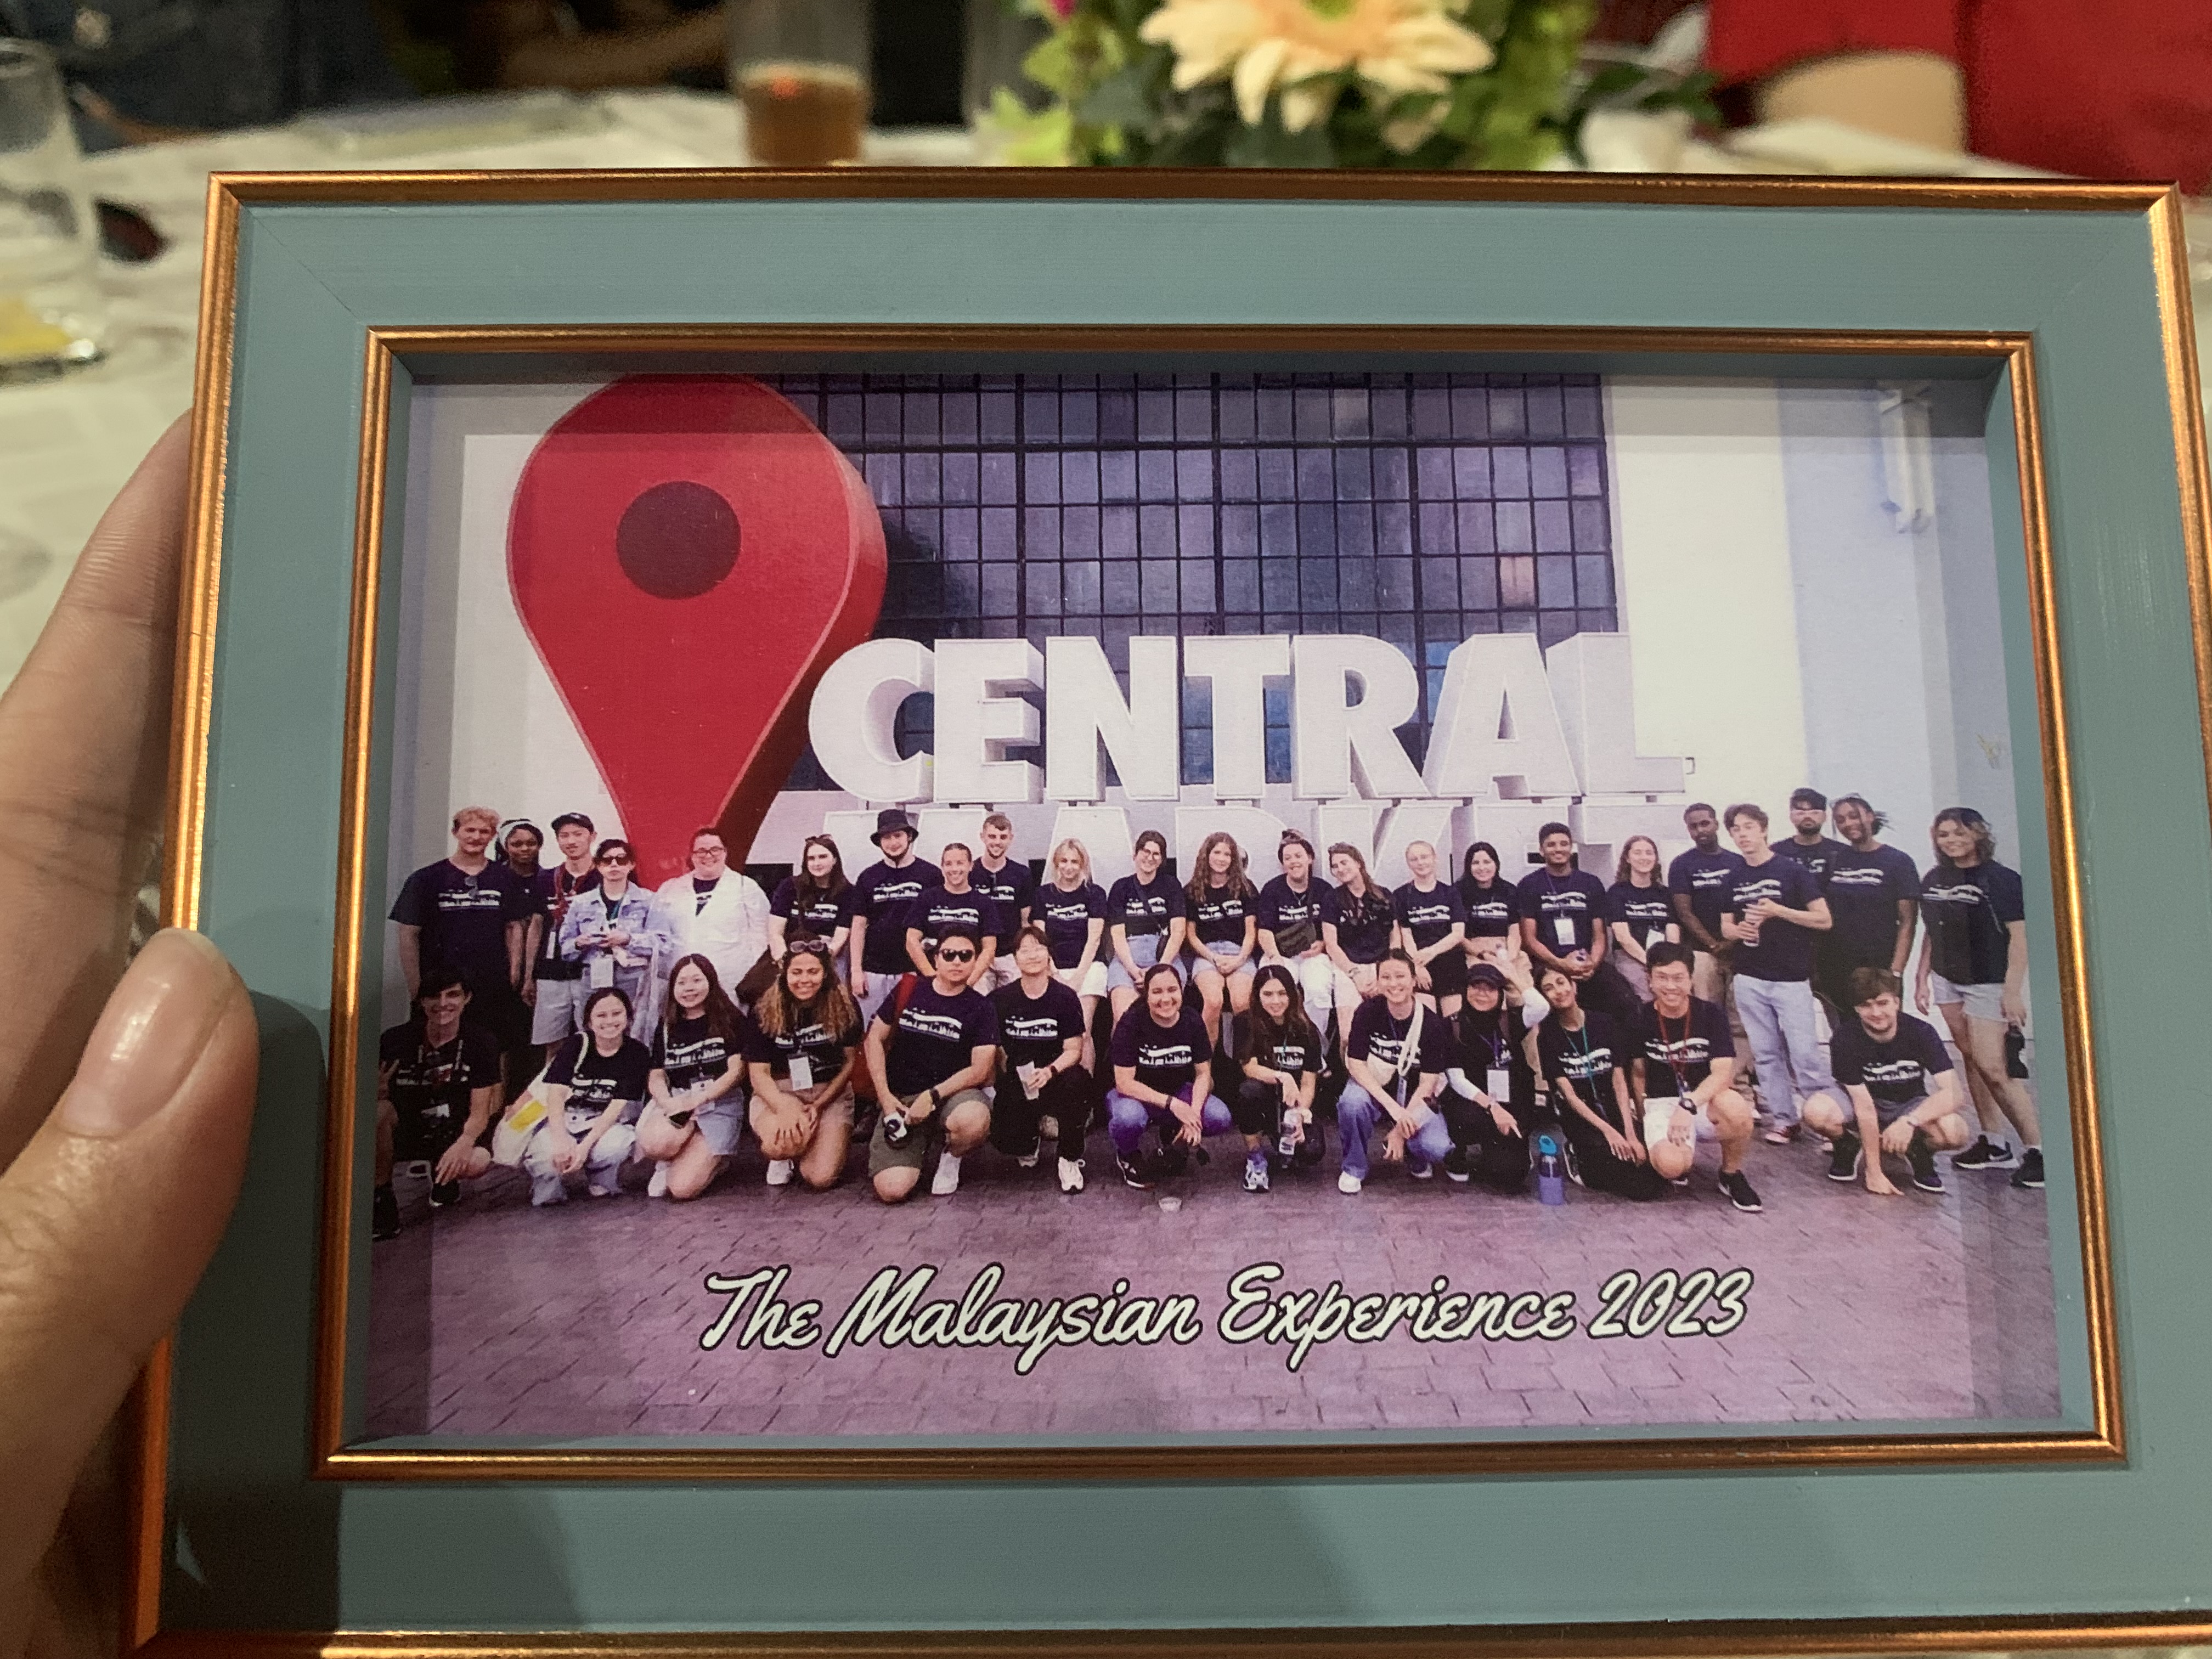 A framed photo of those who attended the Cultural Exchange program to Malaysia.